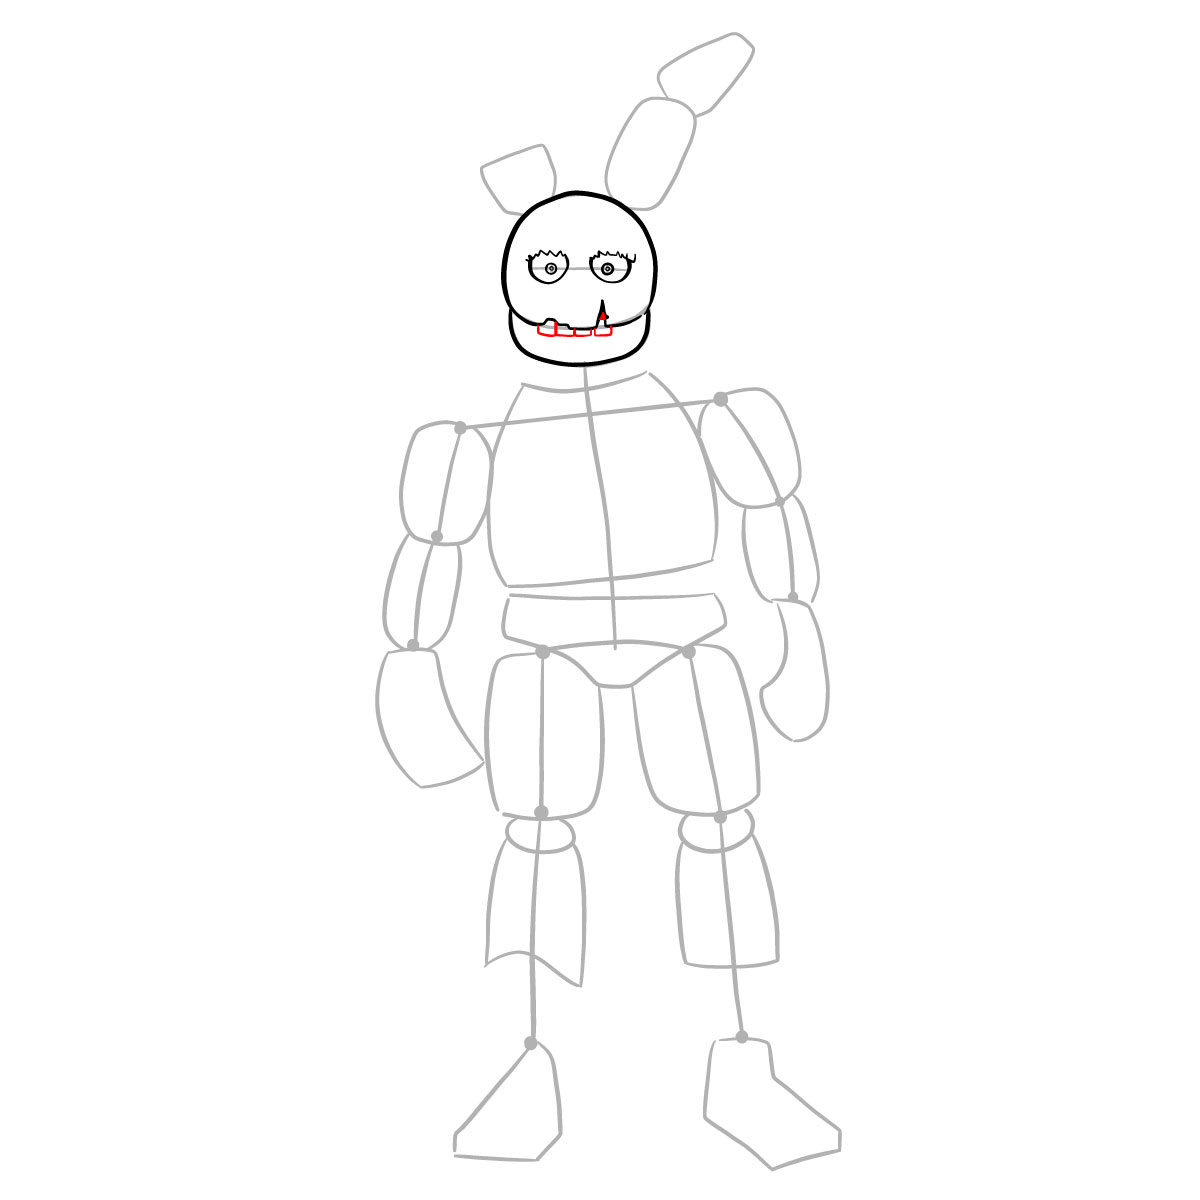 How to draw Springtrap from FNAF 3 - step 08